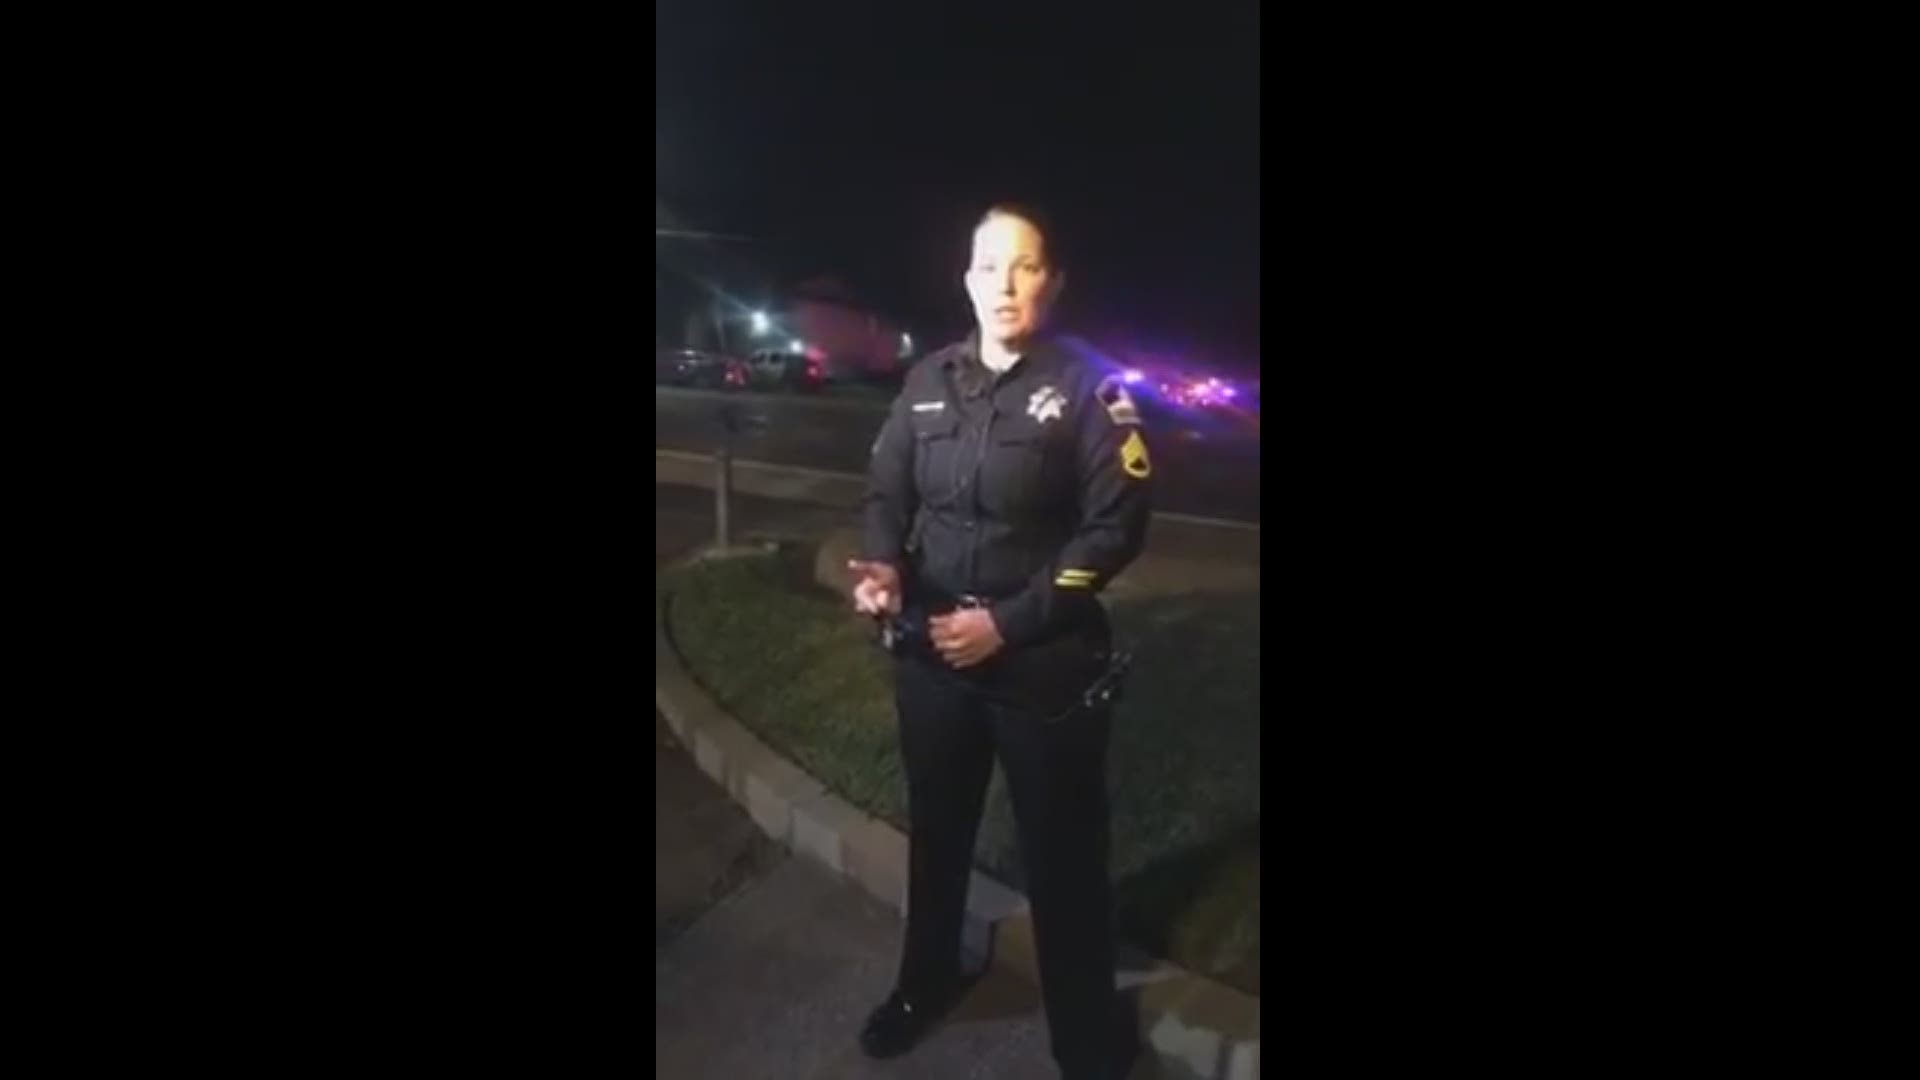 Four people were shot, including a 4-year-old boy, in South Sacramento, Friday night. The chaotic scene unfolded around 10:40 p.m. in the 7300 block of Stockton Boulevard. Daniela Pardo went live on Facebook with the latest updates.